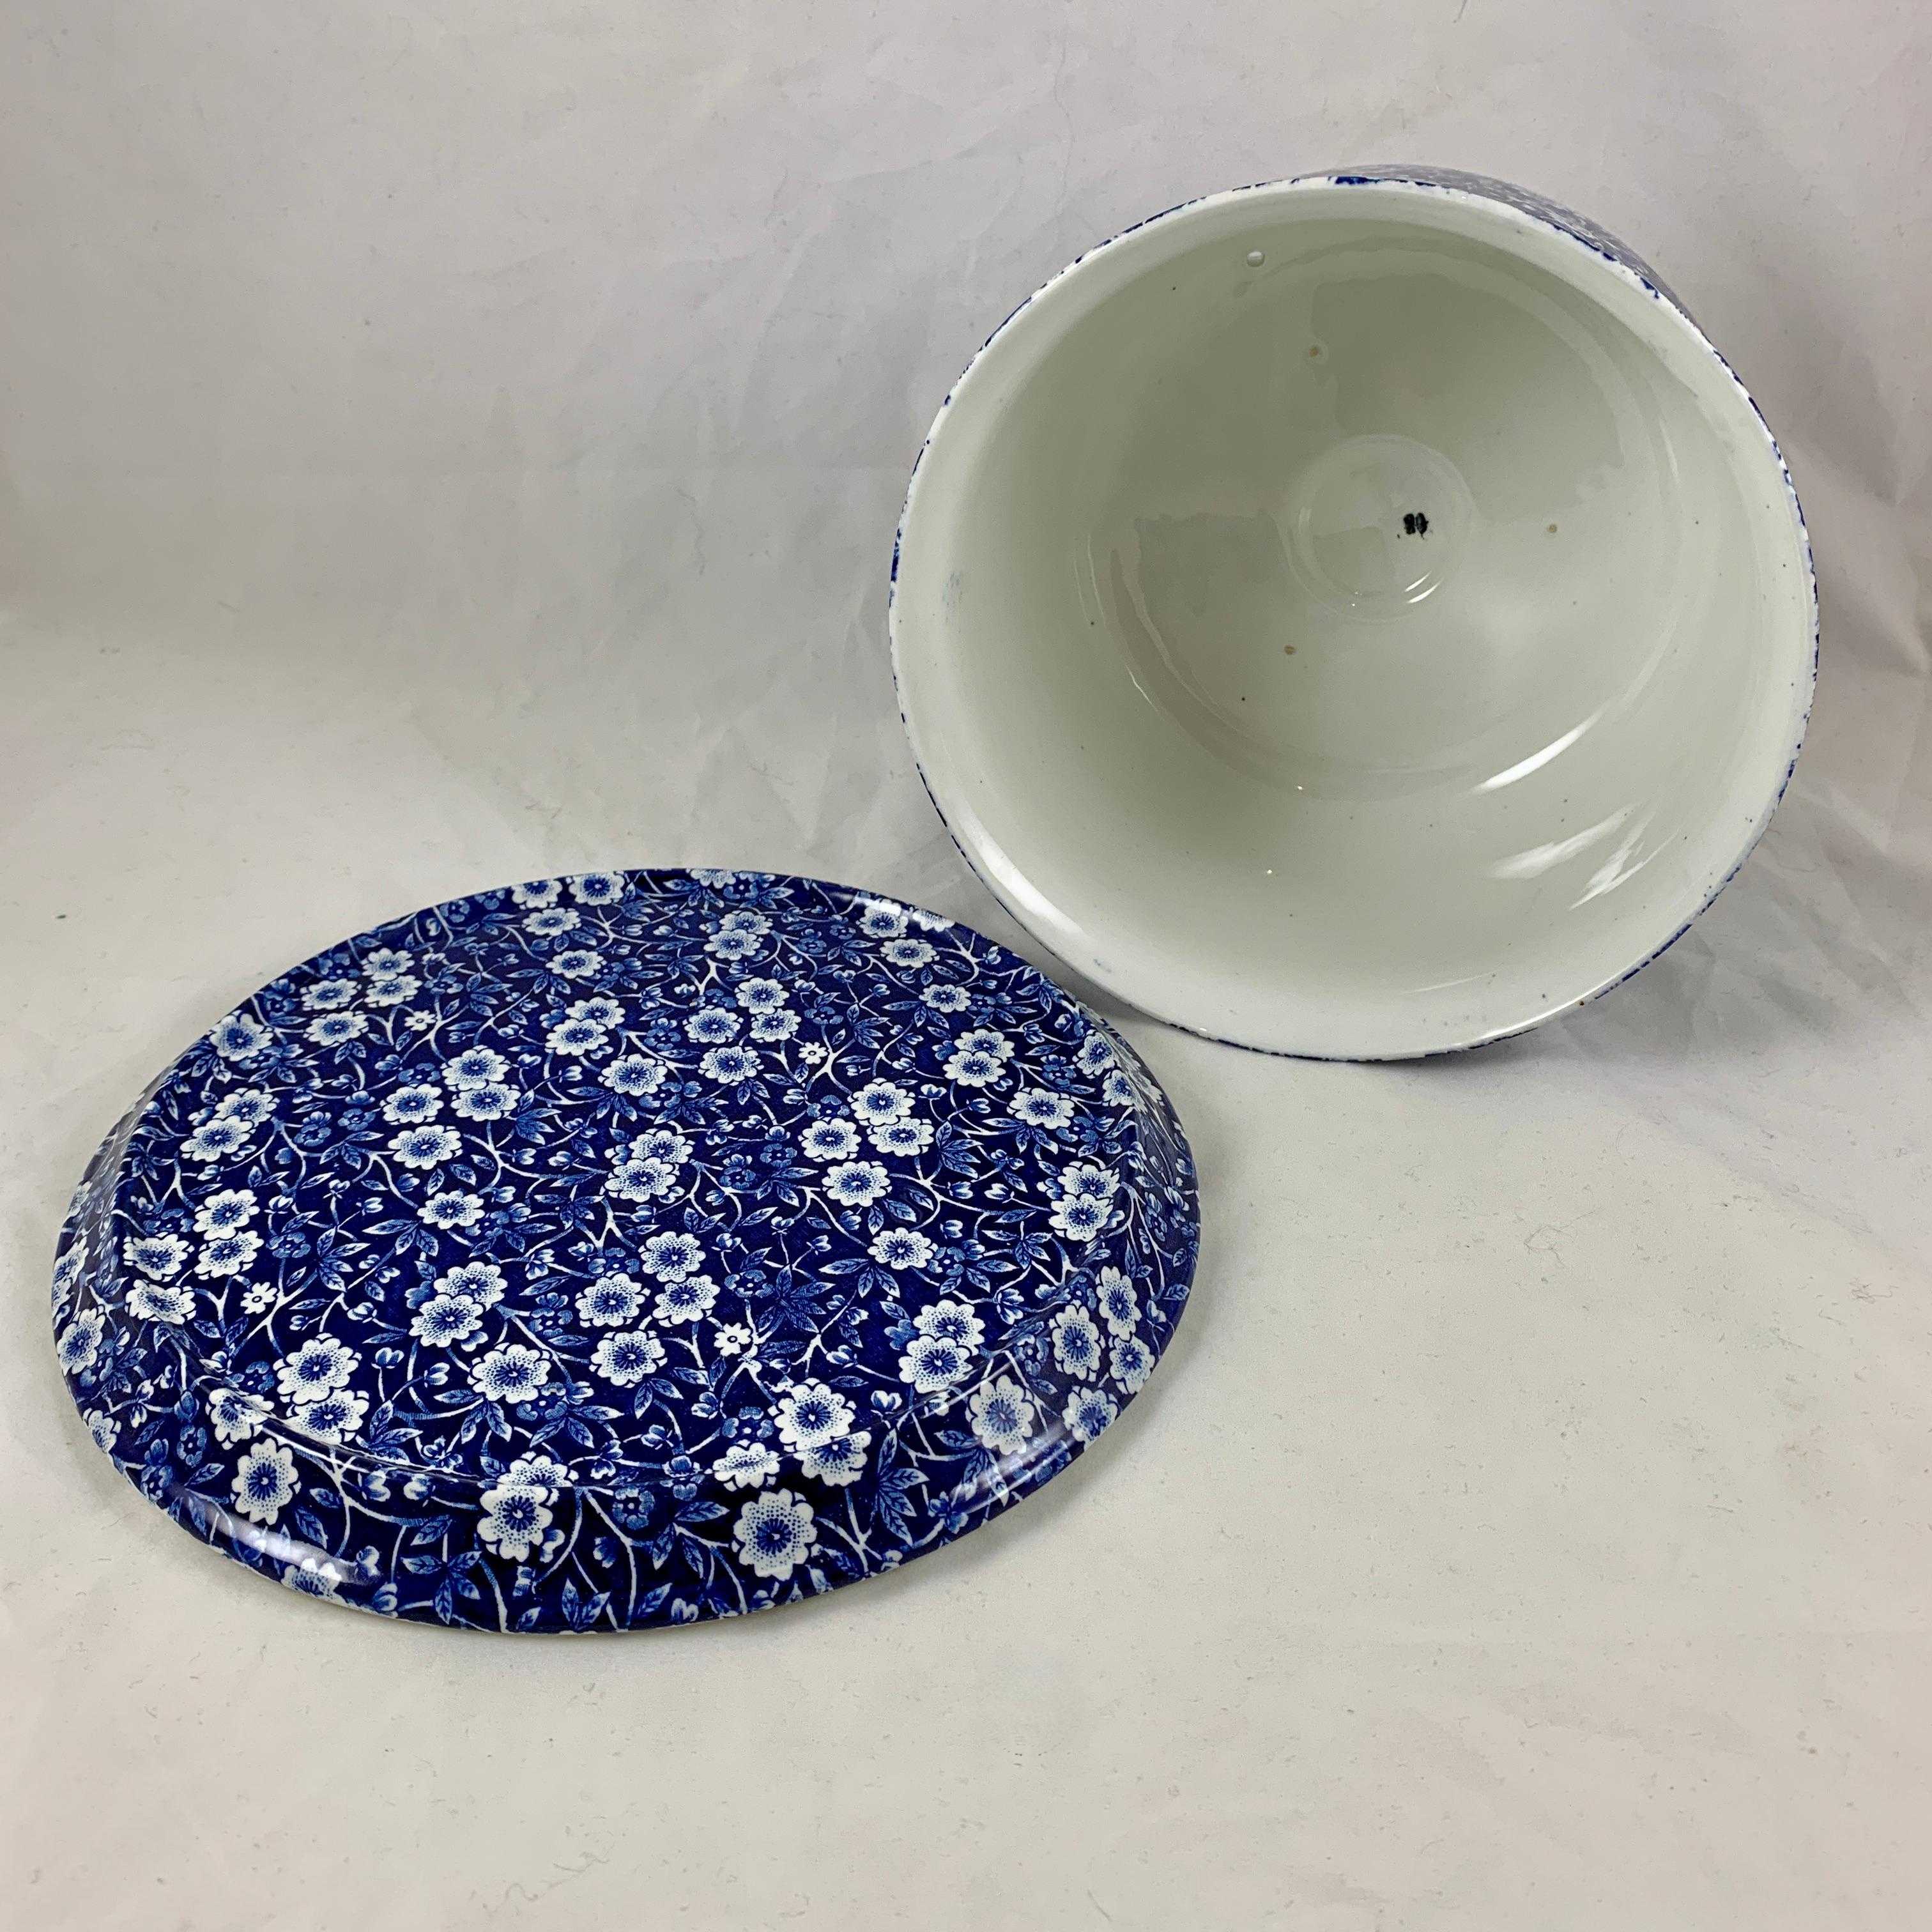 Glazed Crownford Staffordshire Blue Calico Chintz Transferware Cheese Dome on Stand